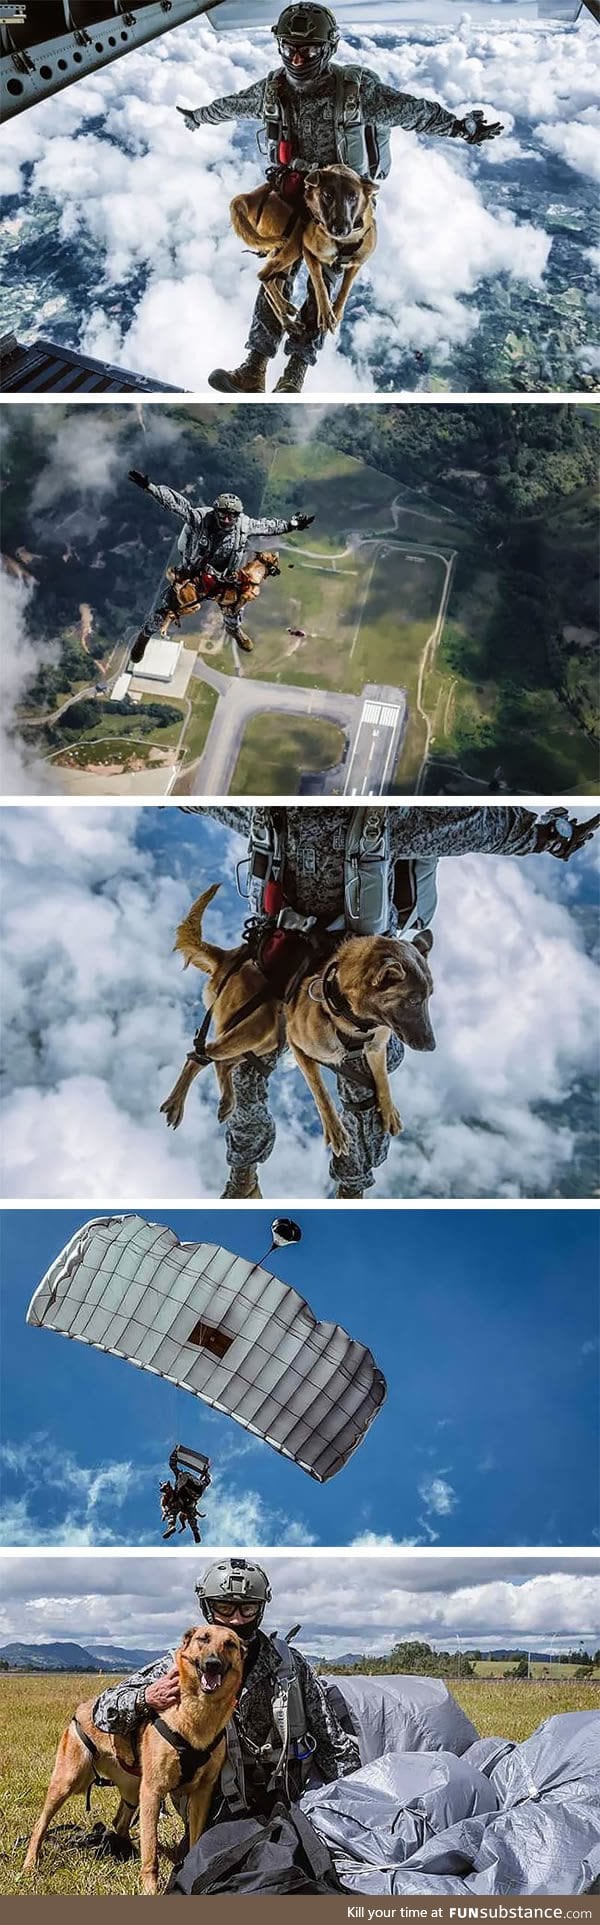 Colombian daredevil dog skydives for military training